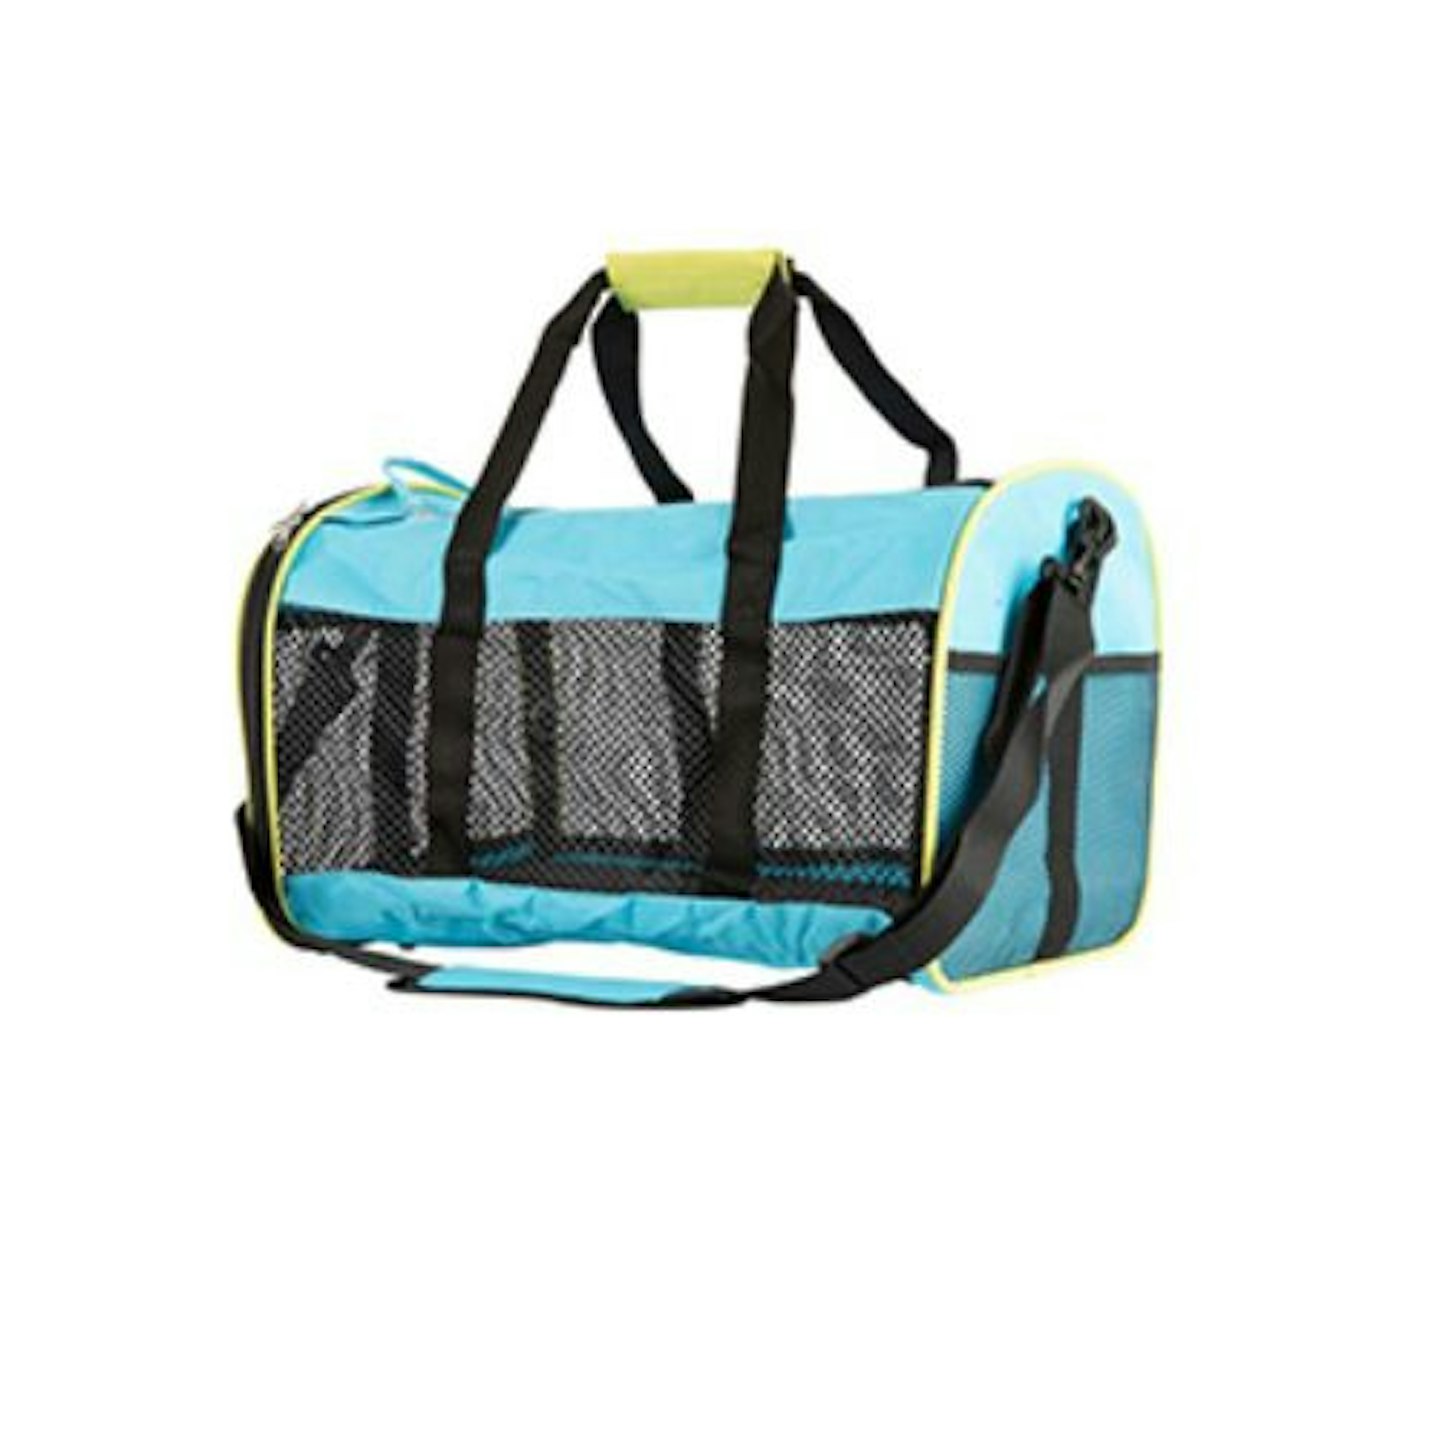 Pets at Home Bright Blue Fabric Pet Carrier